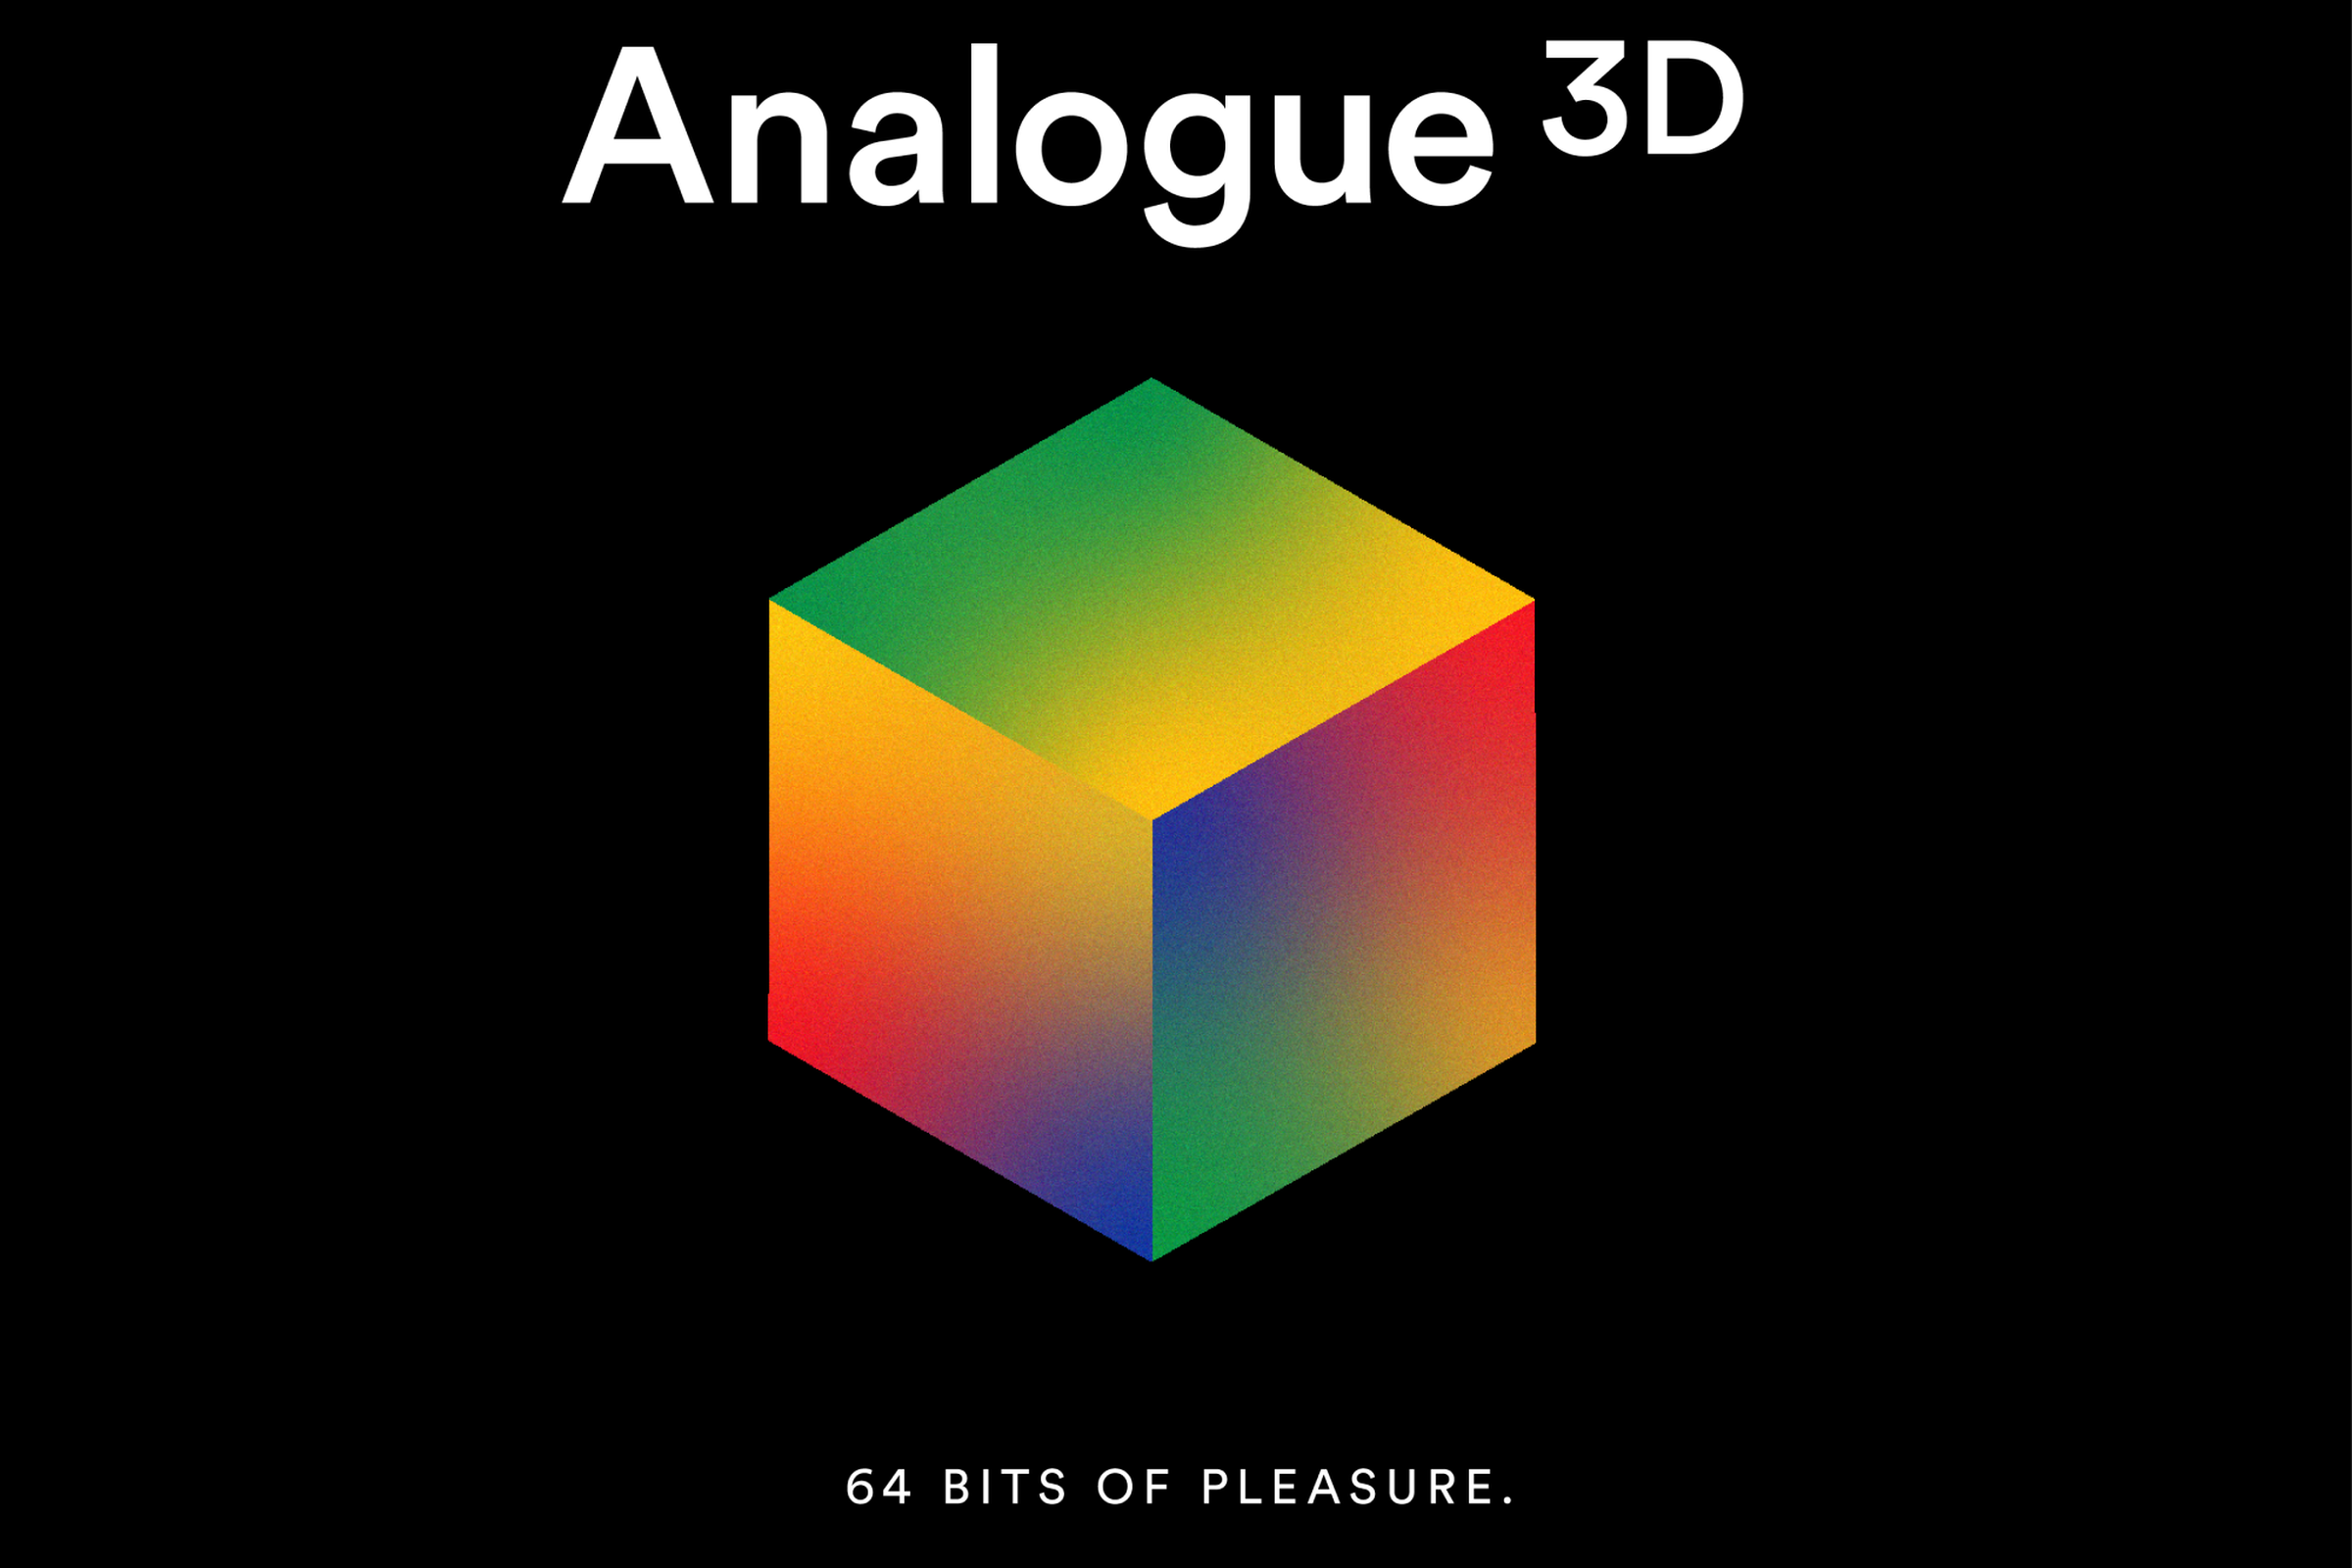 The logo for the Analogue 3D game console.